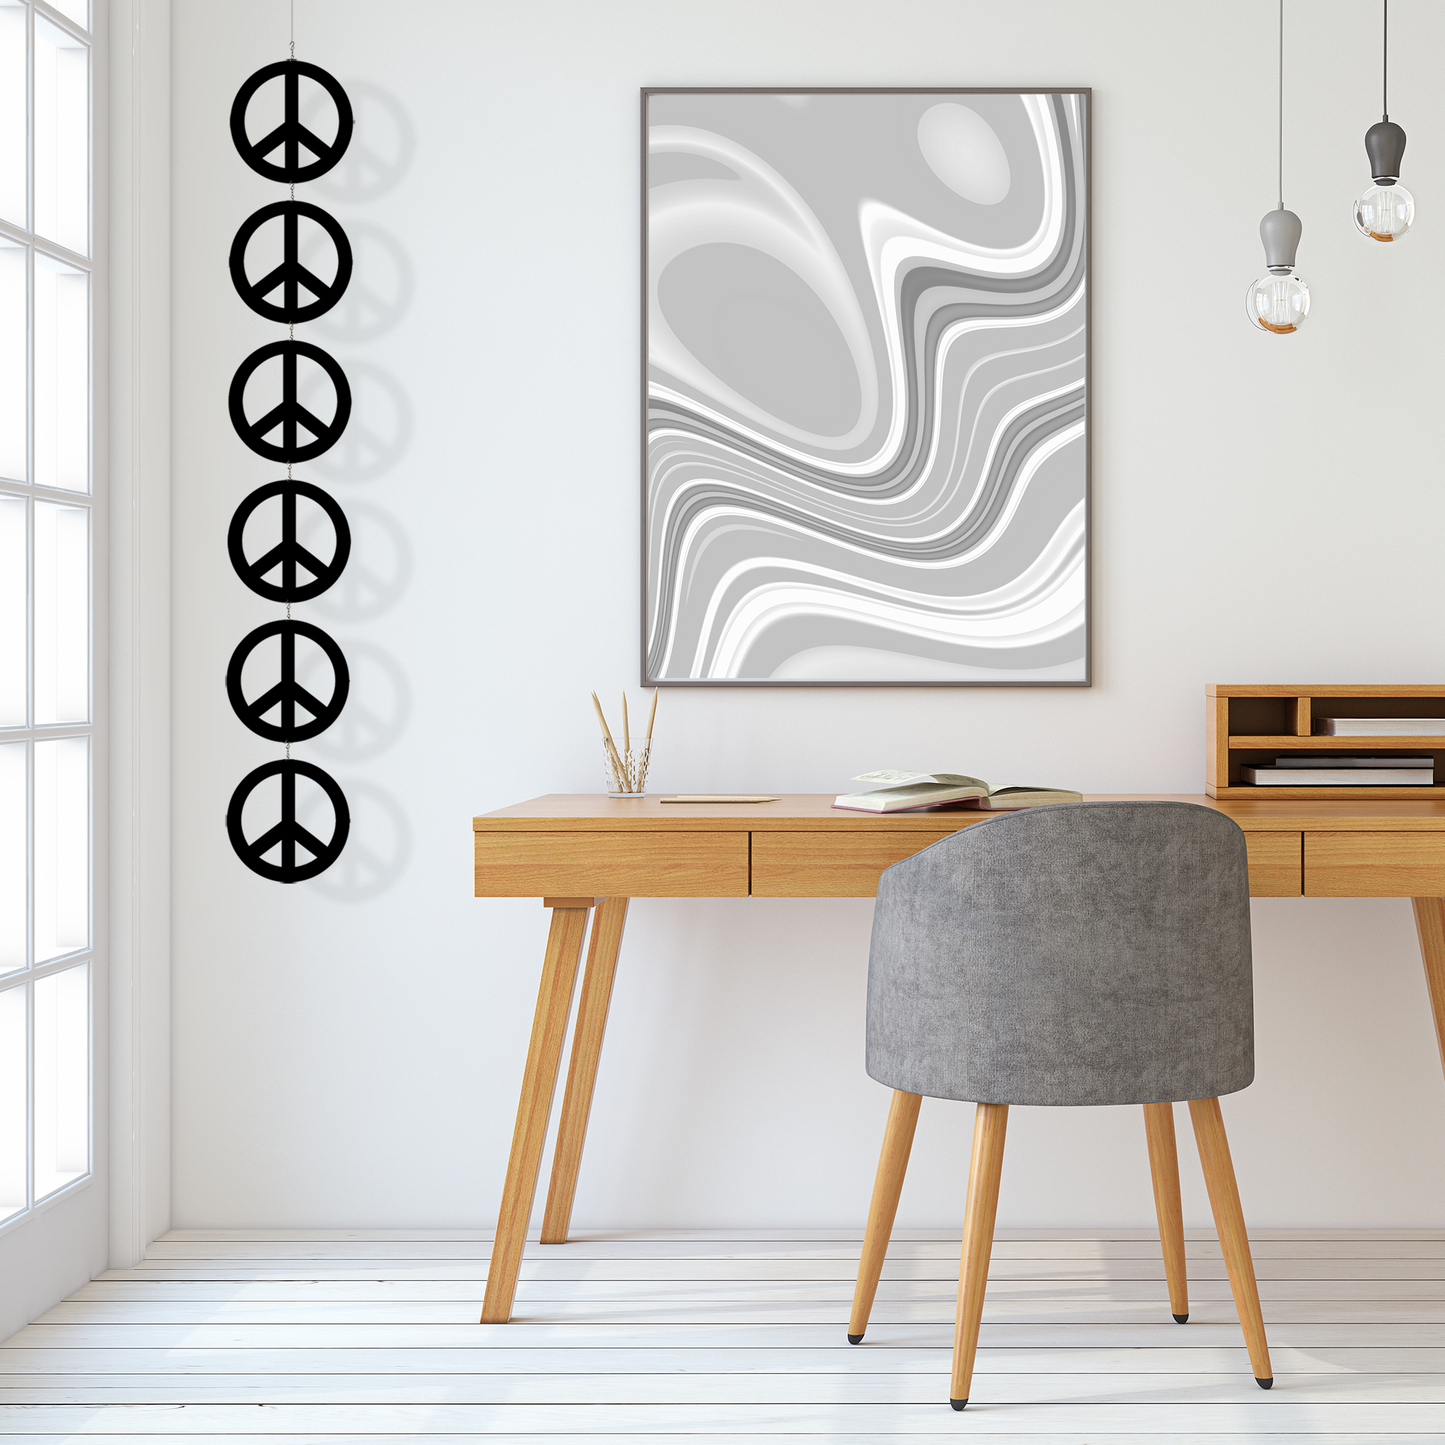 Home office decor with Peace Sign hanging kinetic art mobile, modern desk and framed art with uncluttered wood desk next to windows - by AtomicMobiles.com